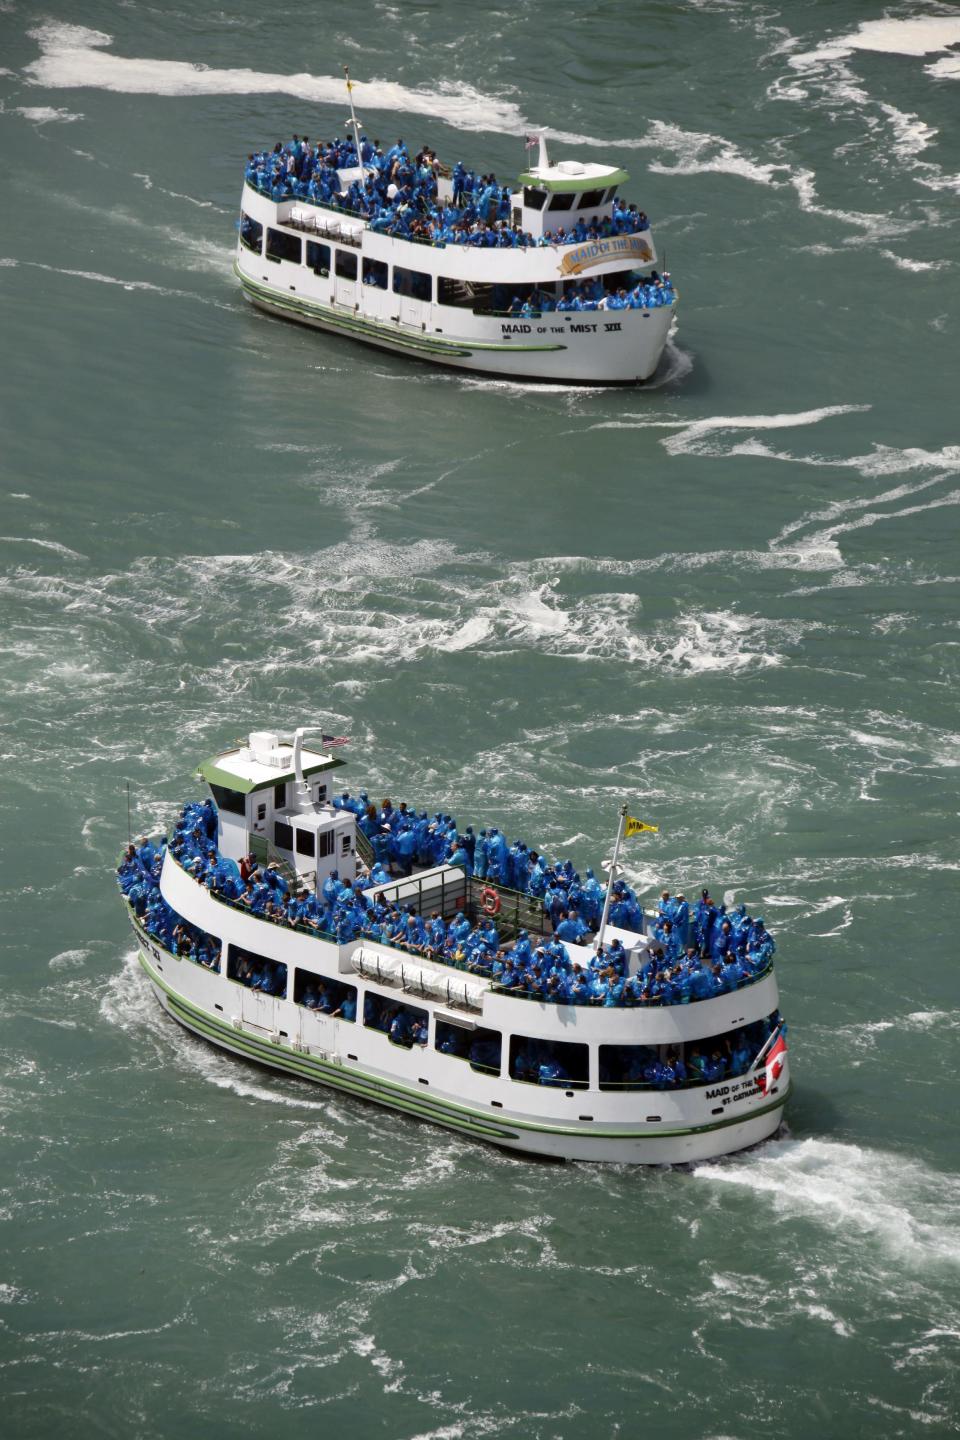 FILE - In this June 11, 2010 file photo, tourists ride the Maid of the Mist tour boats in Niagara Falls, N.Y. The tour company chosen to take over the Niagara Falls tour boat business in Canada says it plans to build customized new boats and upgrade amenities while maintaining the things that have made the sightseeing rides so popular for more than 100 years. (AP Photo/David Duprey, File)